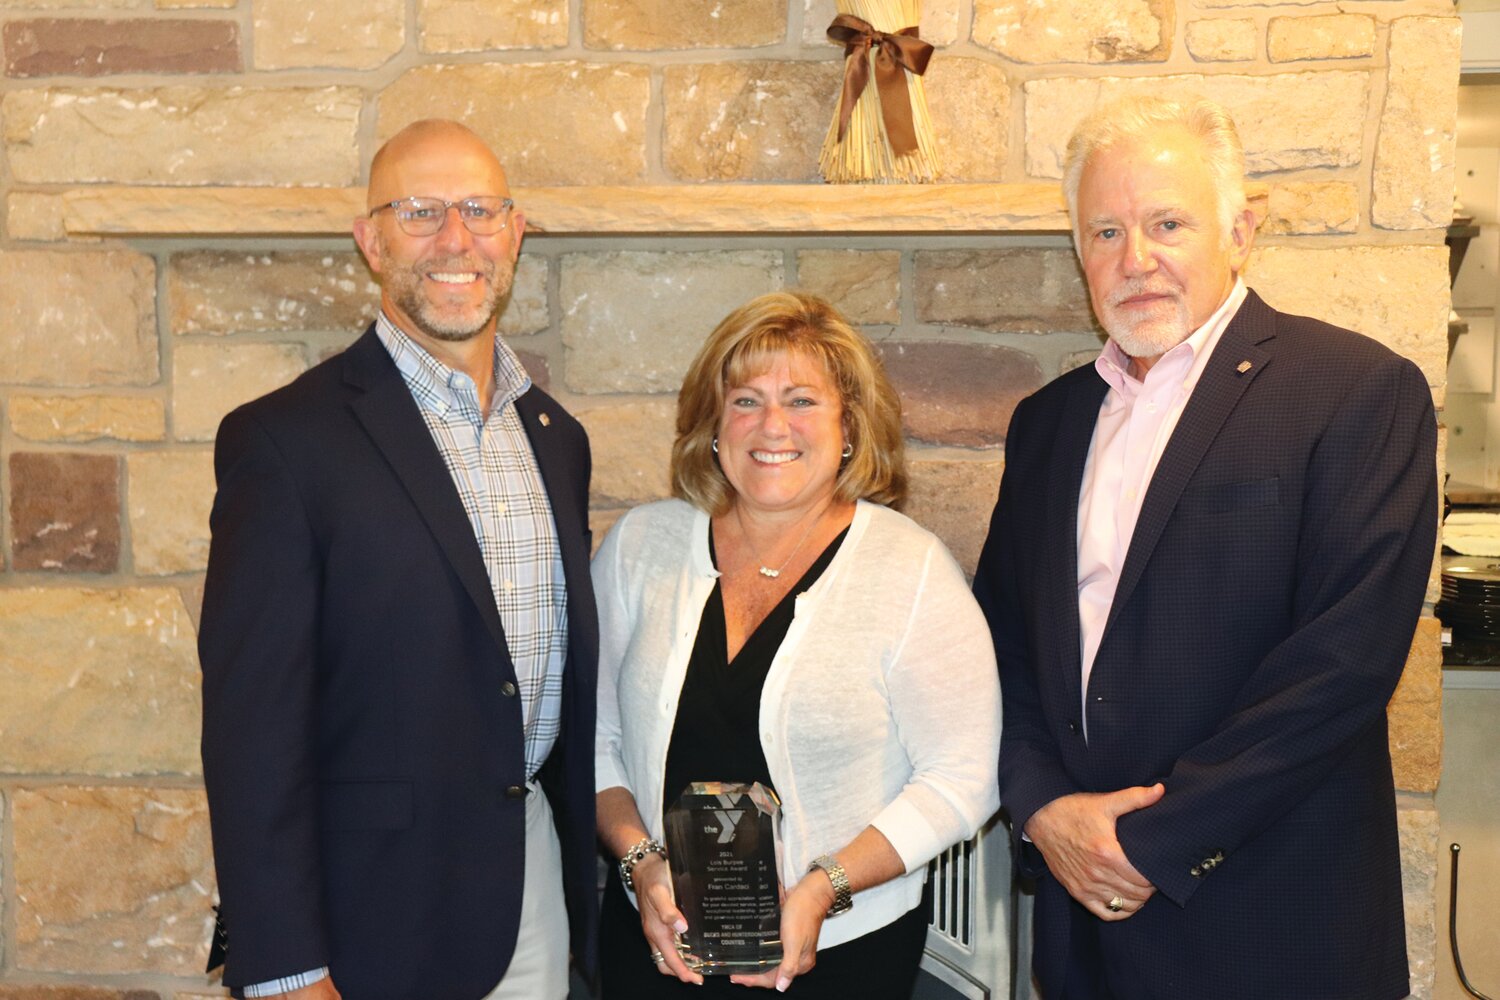 From left are: President/CEO of YMCA of Bucks and Hunterdon Counties Zane Moore with Burpee Award recipient Fran Cardaci and Chief Volunteer Officer Allen Childs.